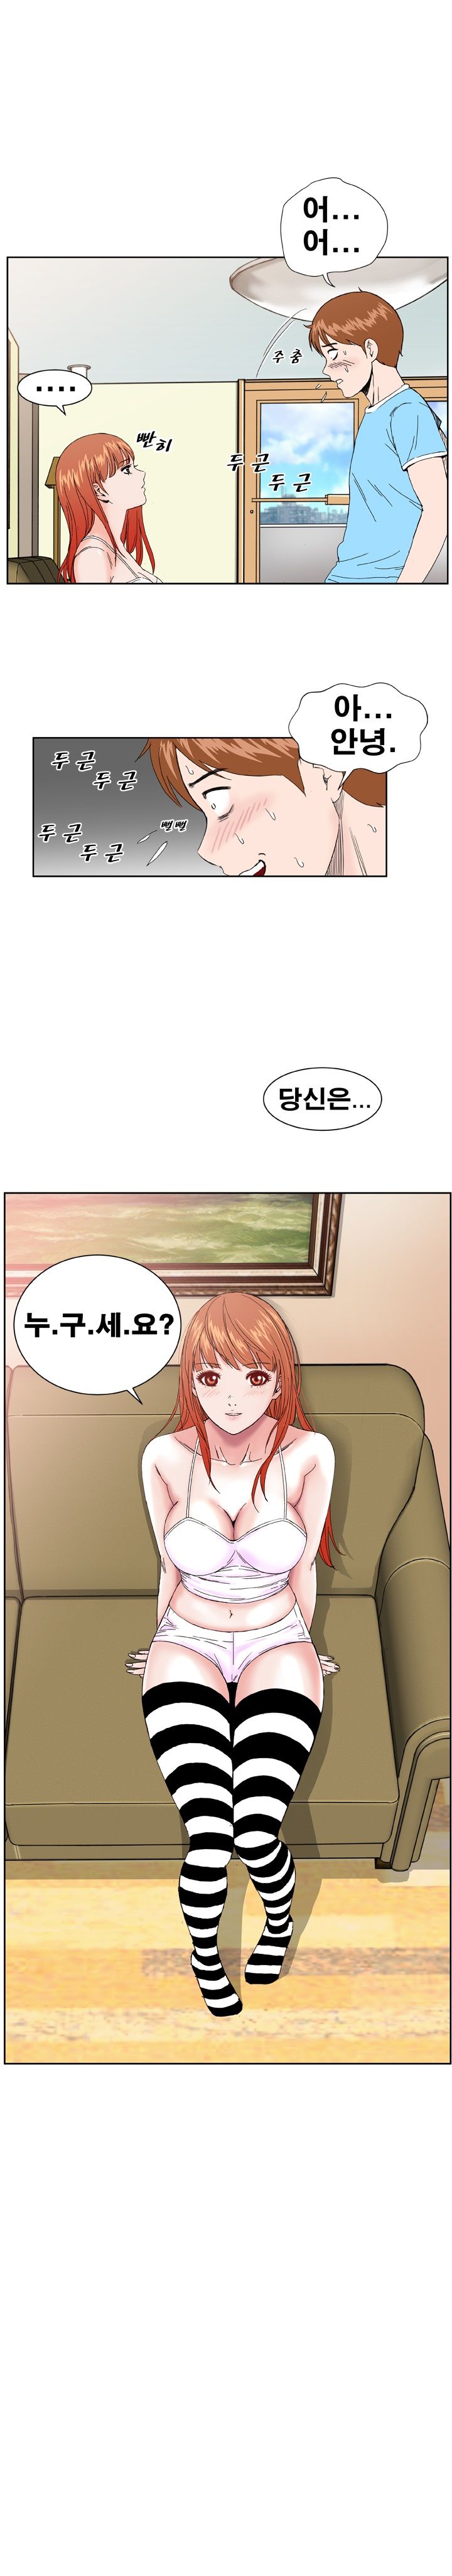 Dream Girl Raw - Chapter 2 Page 6